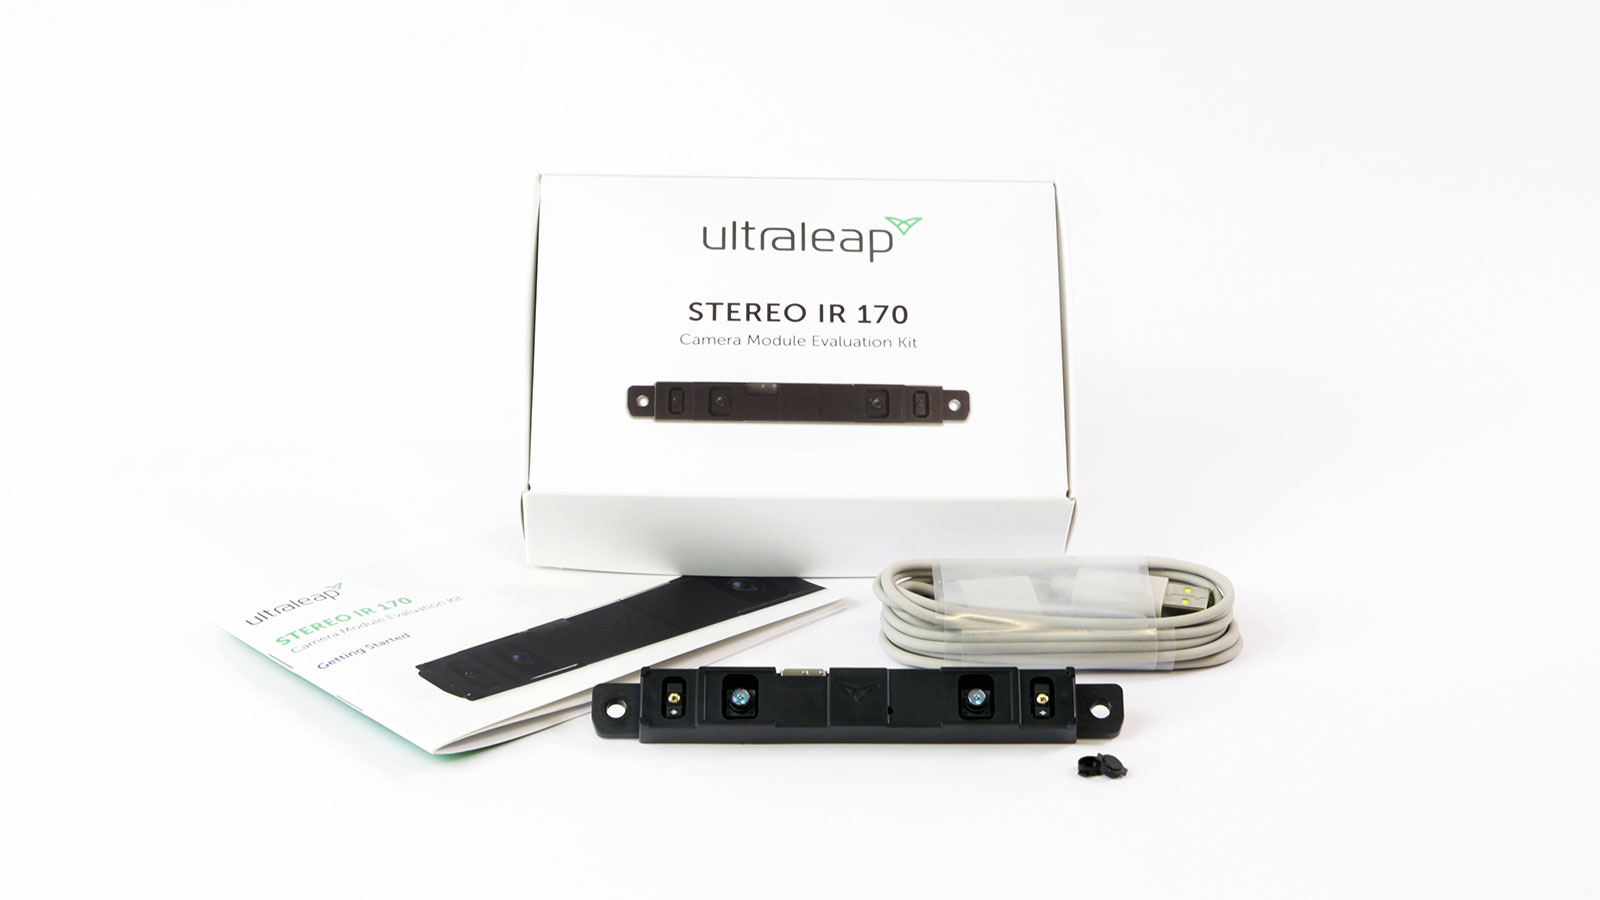 Ultraleap Stereo IR 170 evaluation kit hand tracking